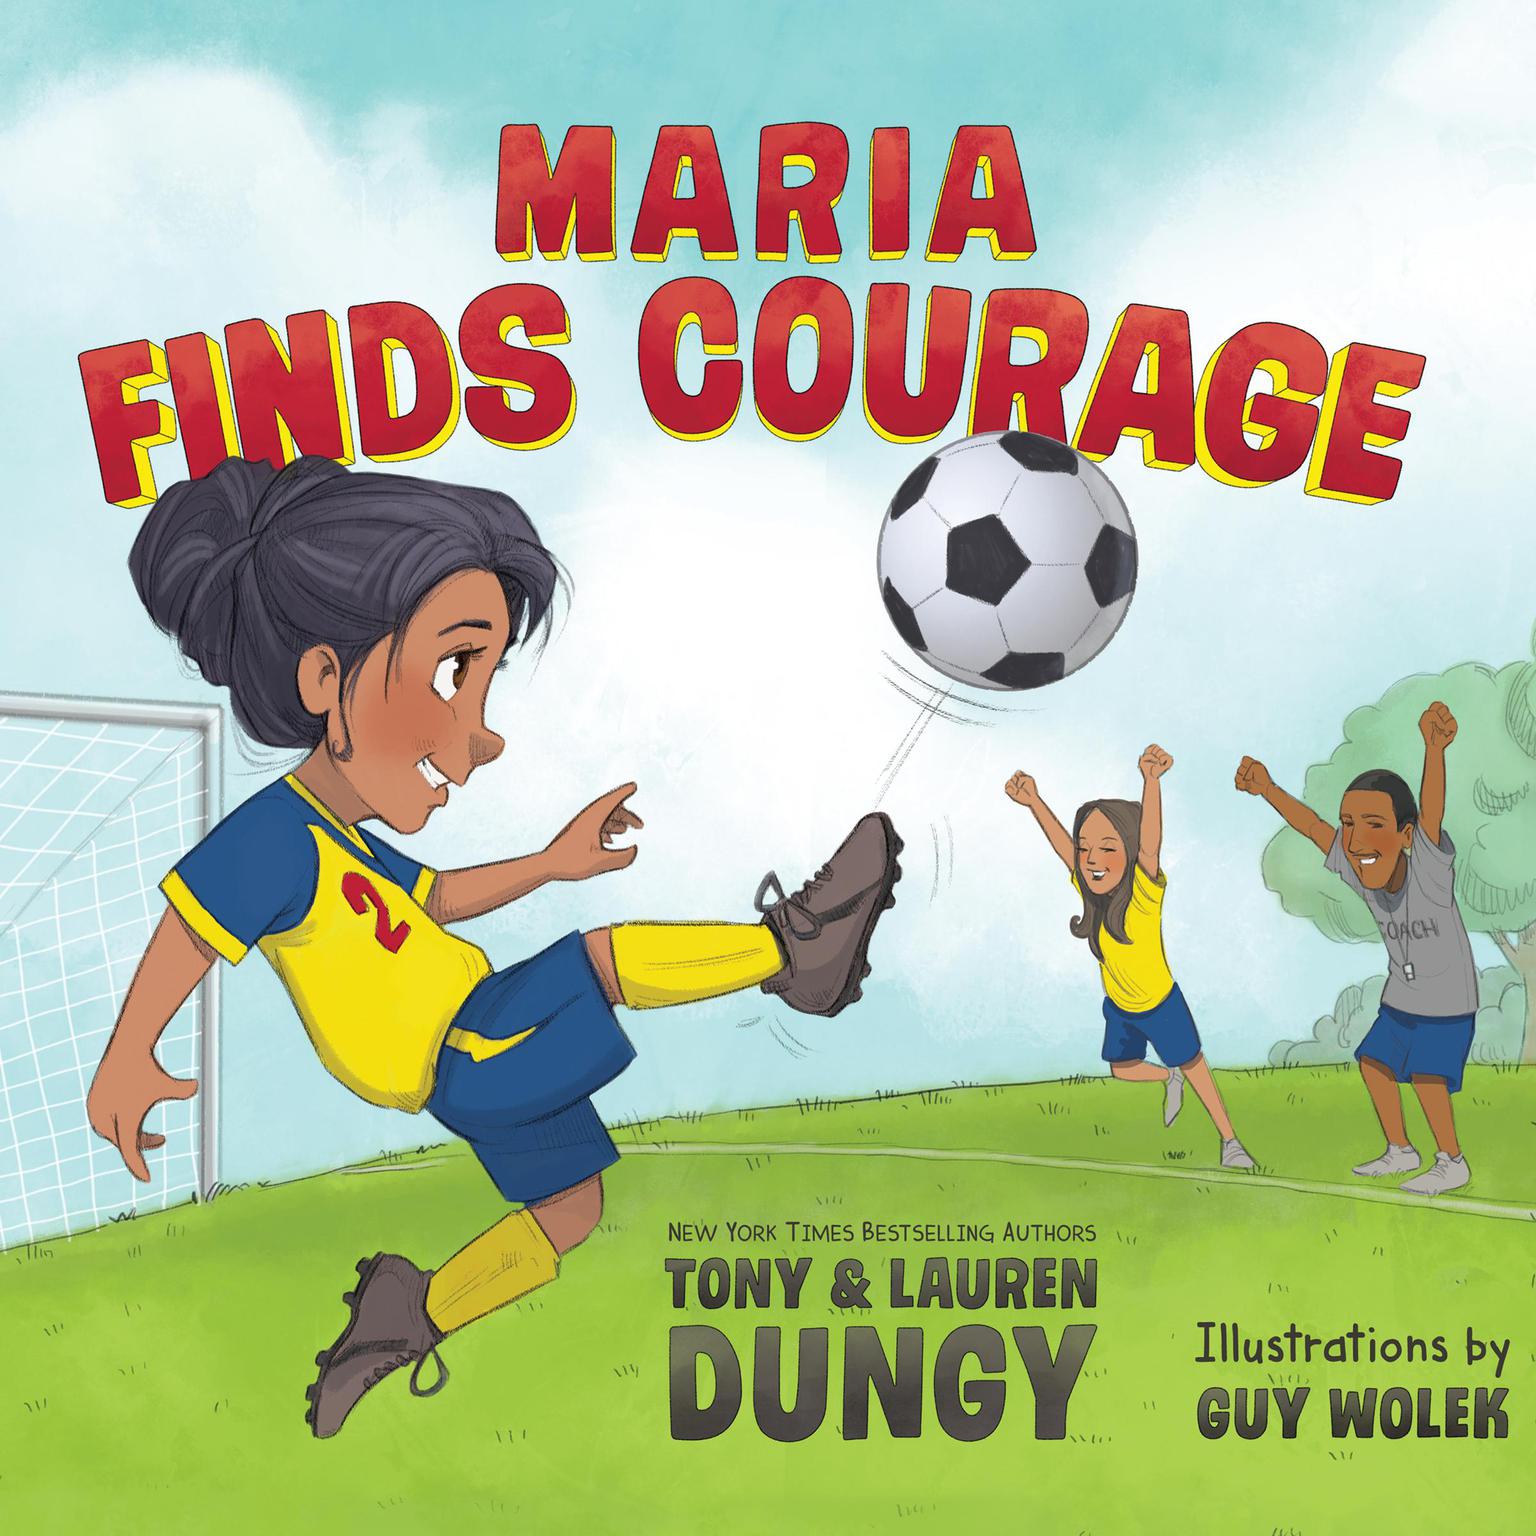 Maria Finds Courage: A Team Dungy Story About Soccer Audiobook, by Tony Dungy